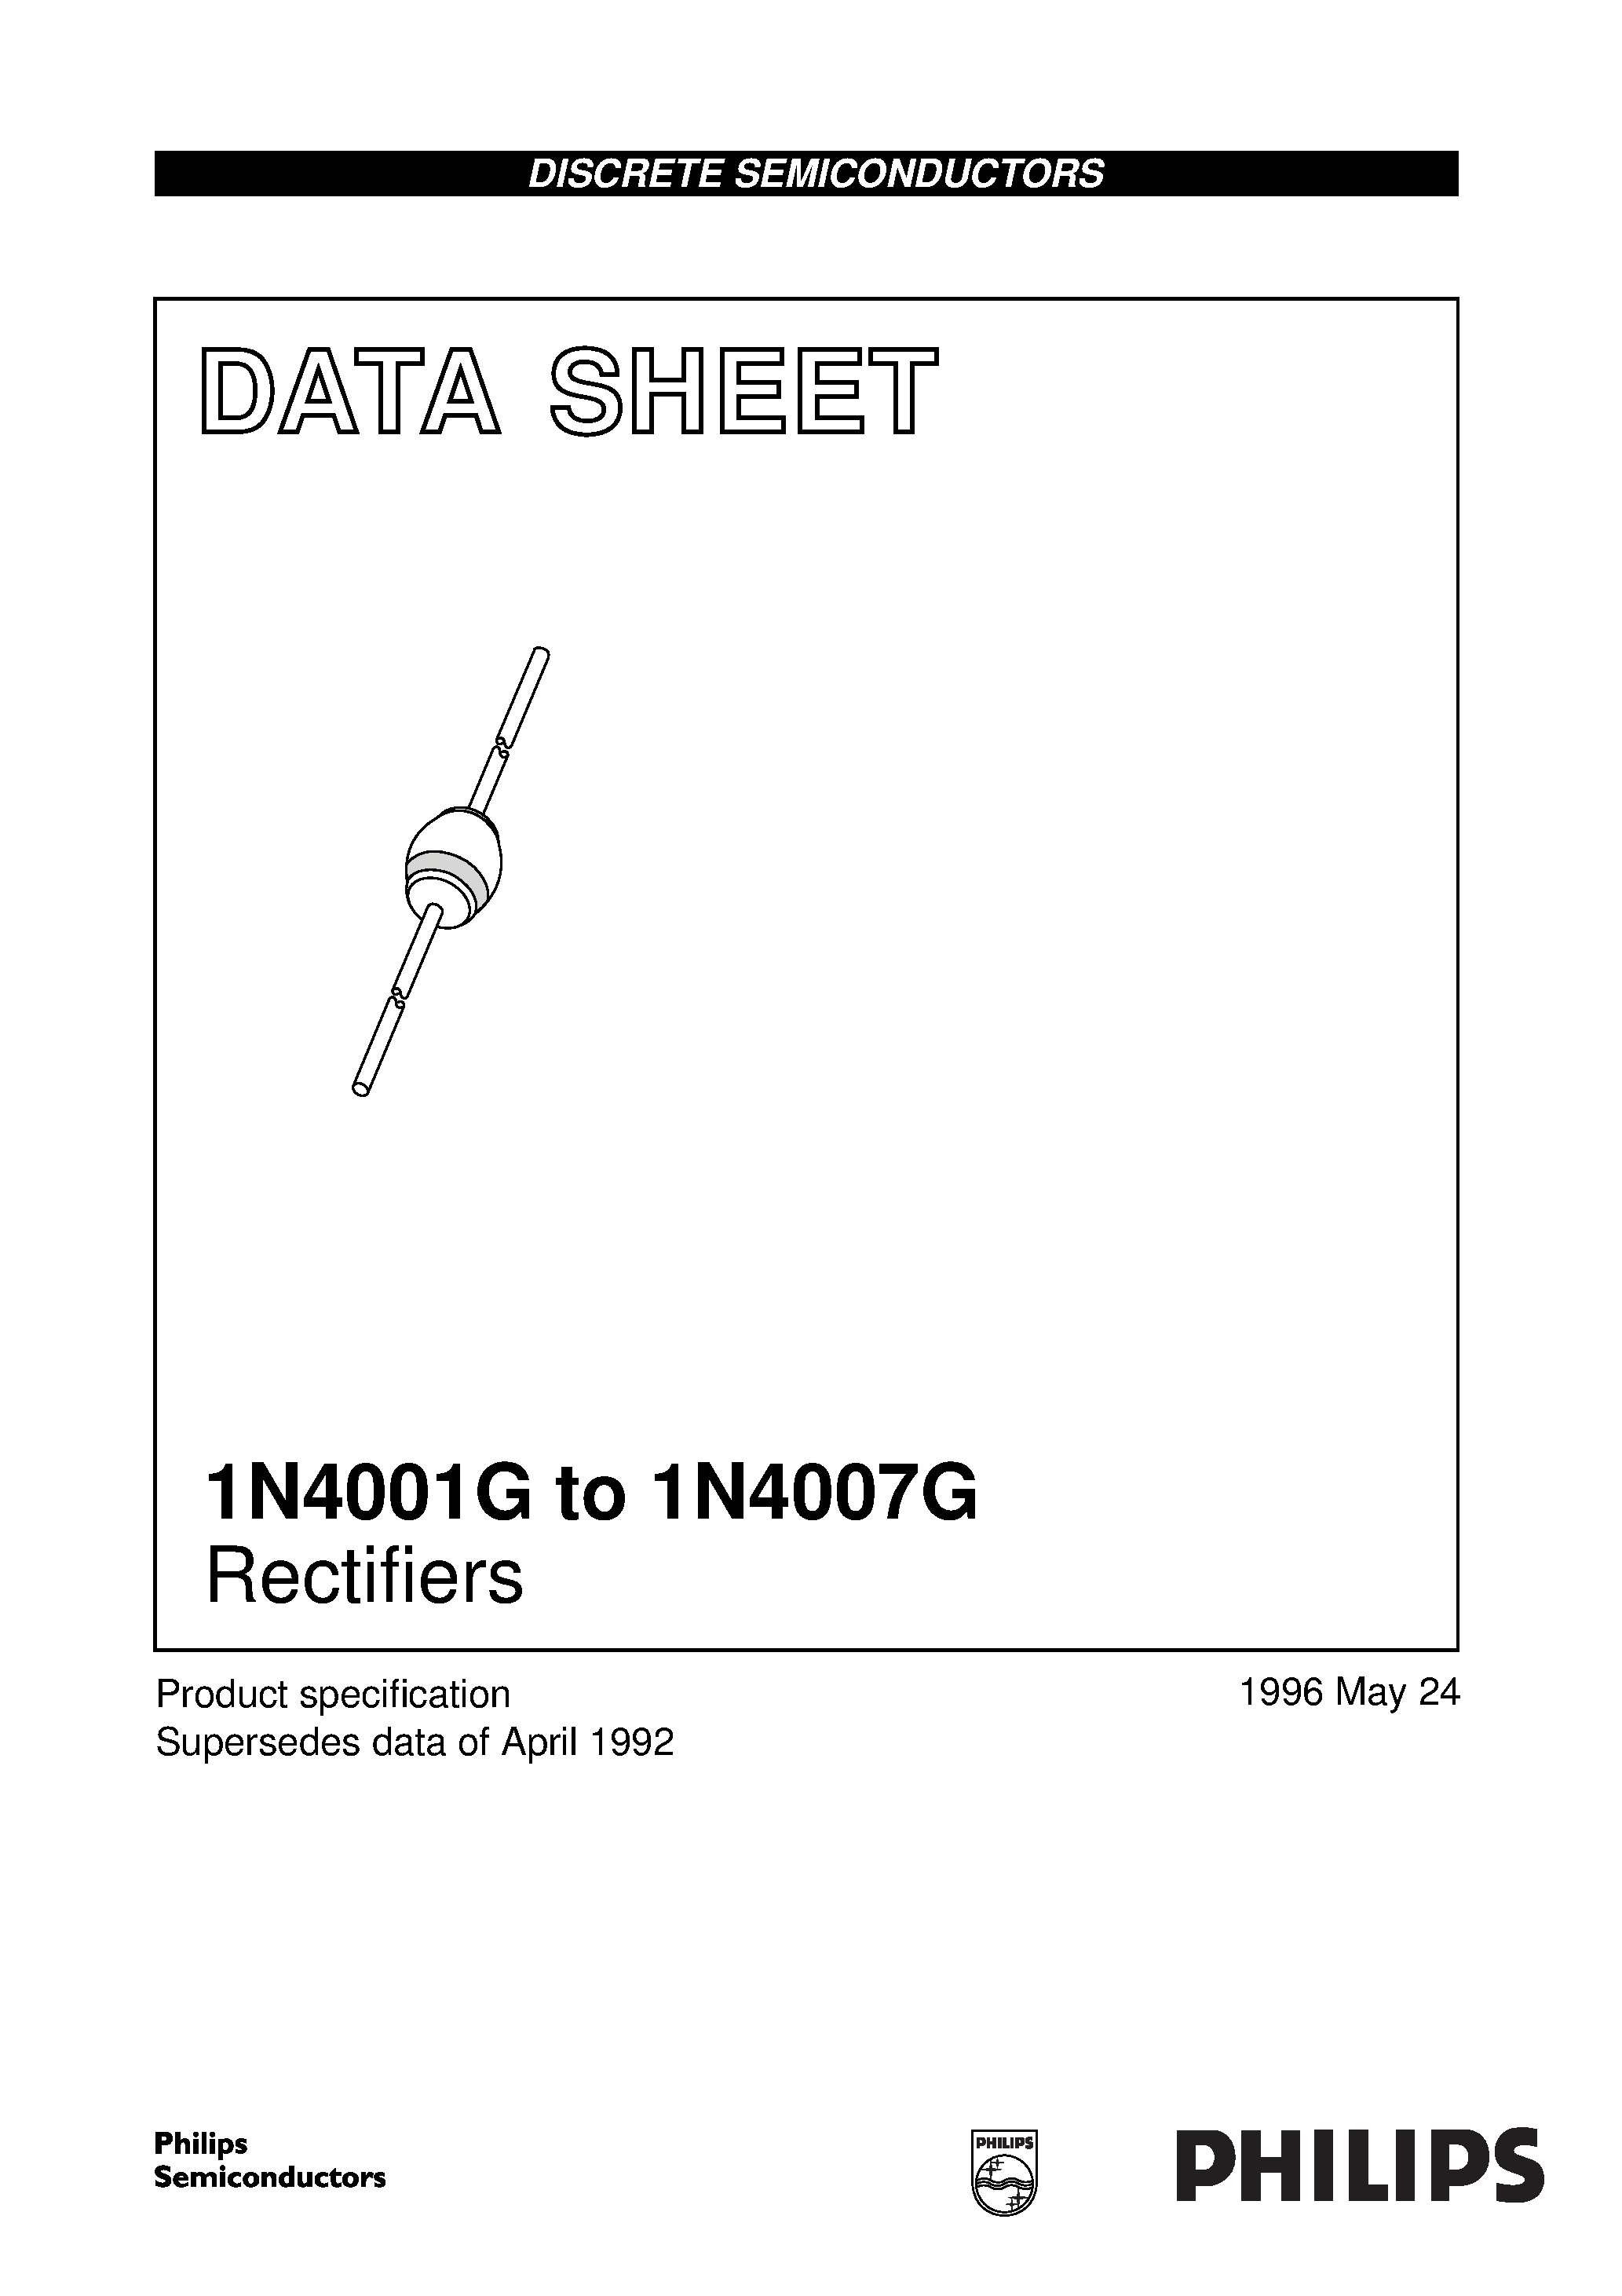 Datasheet 1N4001G - (1N4001G - 1N4007G) Rectifiers(Rugged glass package / using a high temperature alloyed construction) page 1